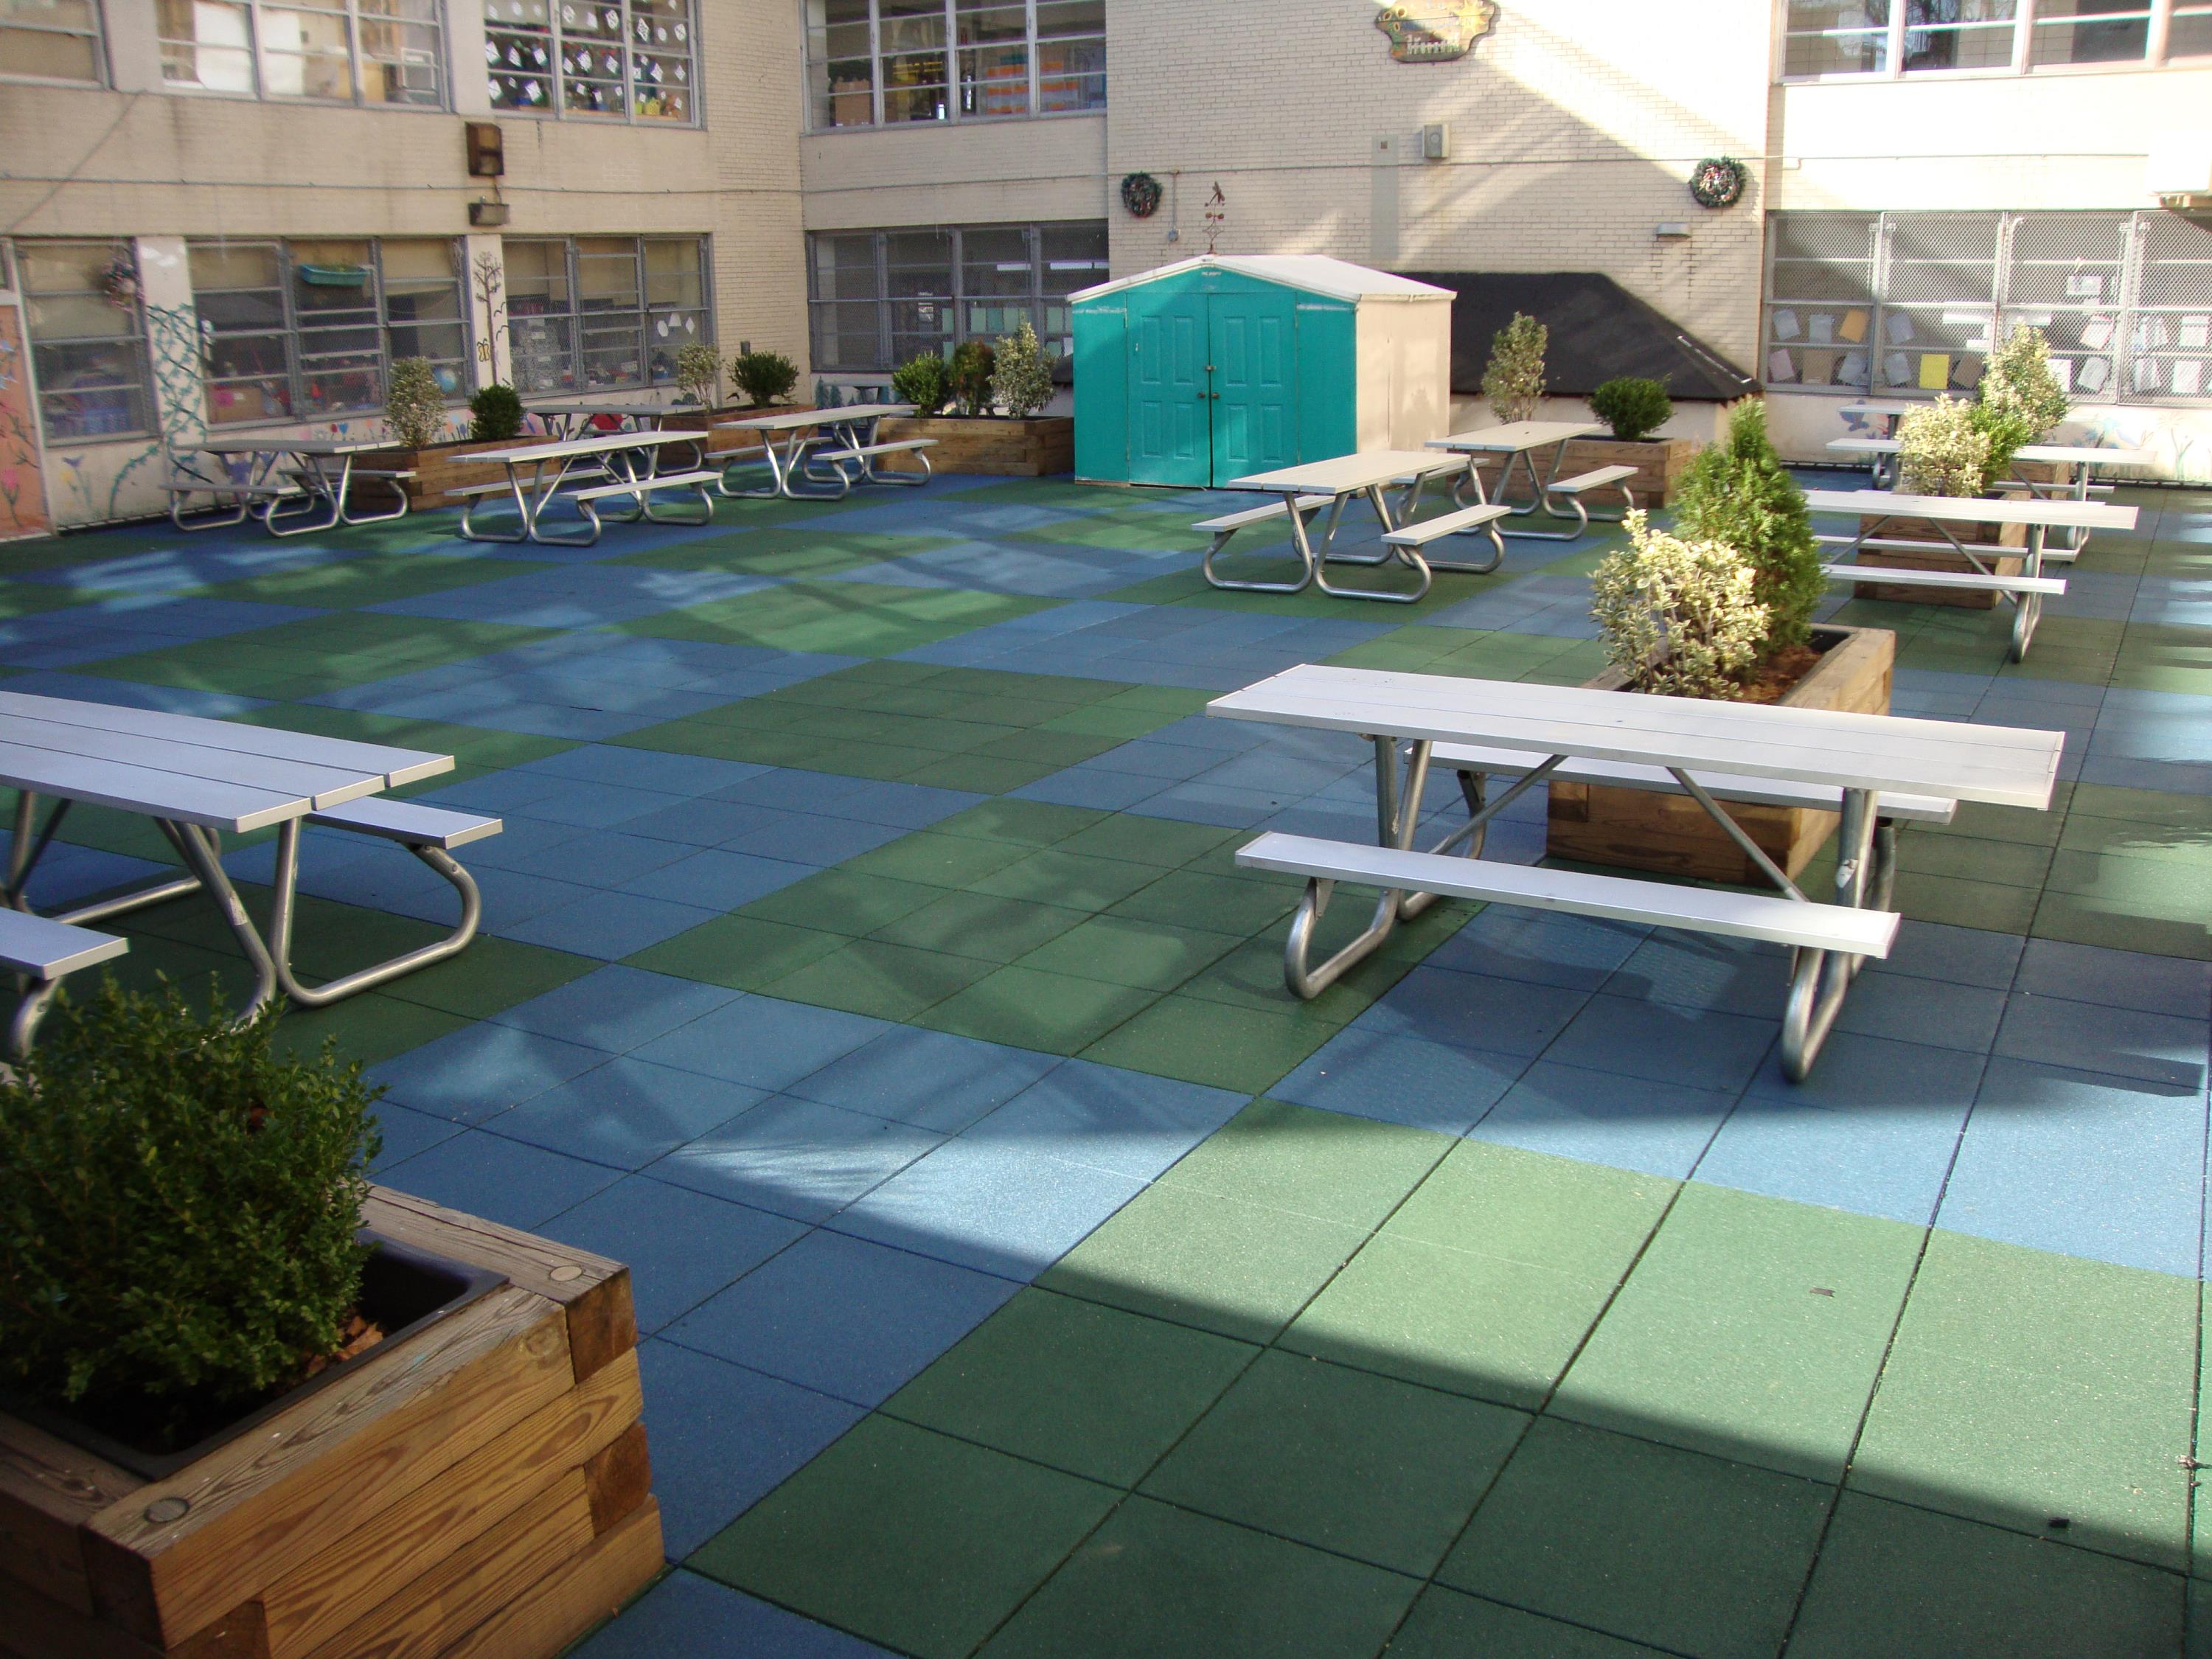 Public School Recreational Rooftop Playground Area Over Concrete Pavers b